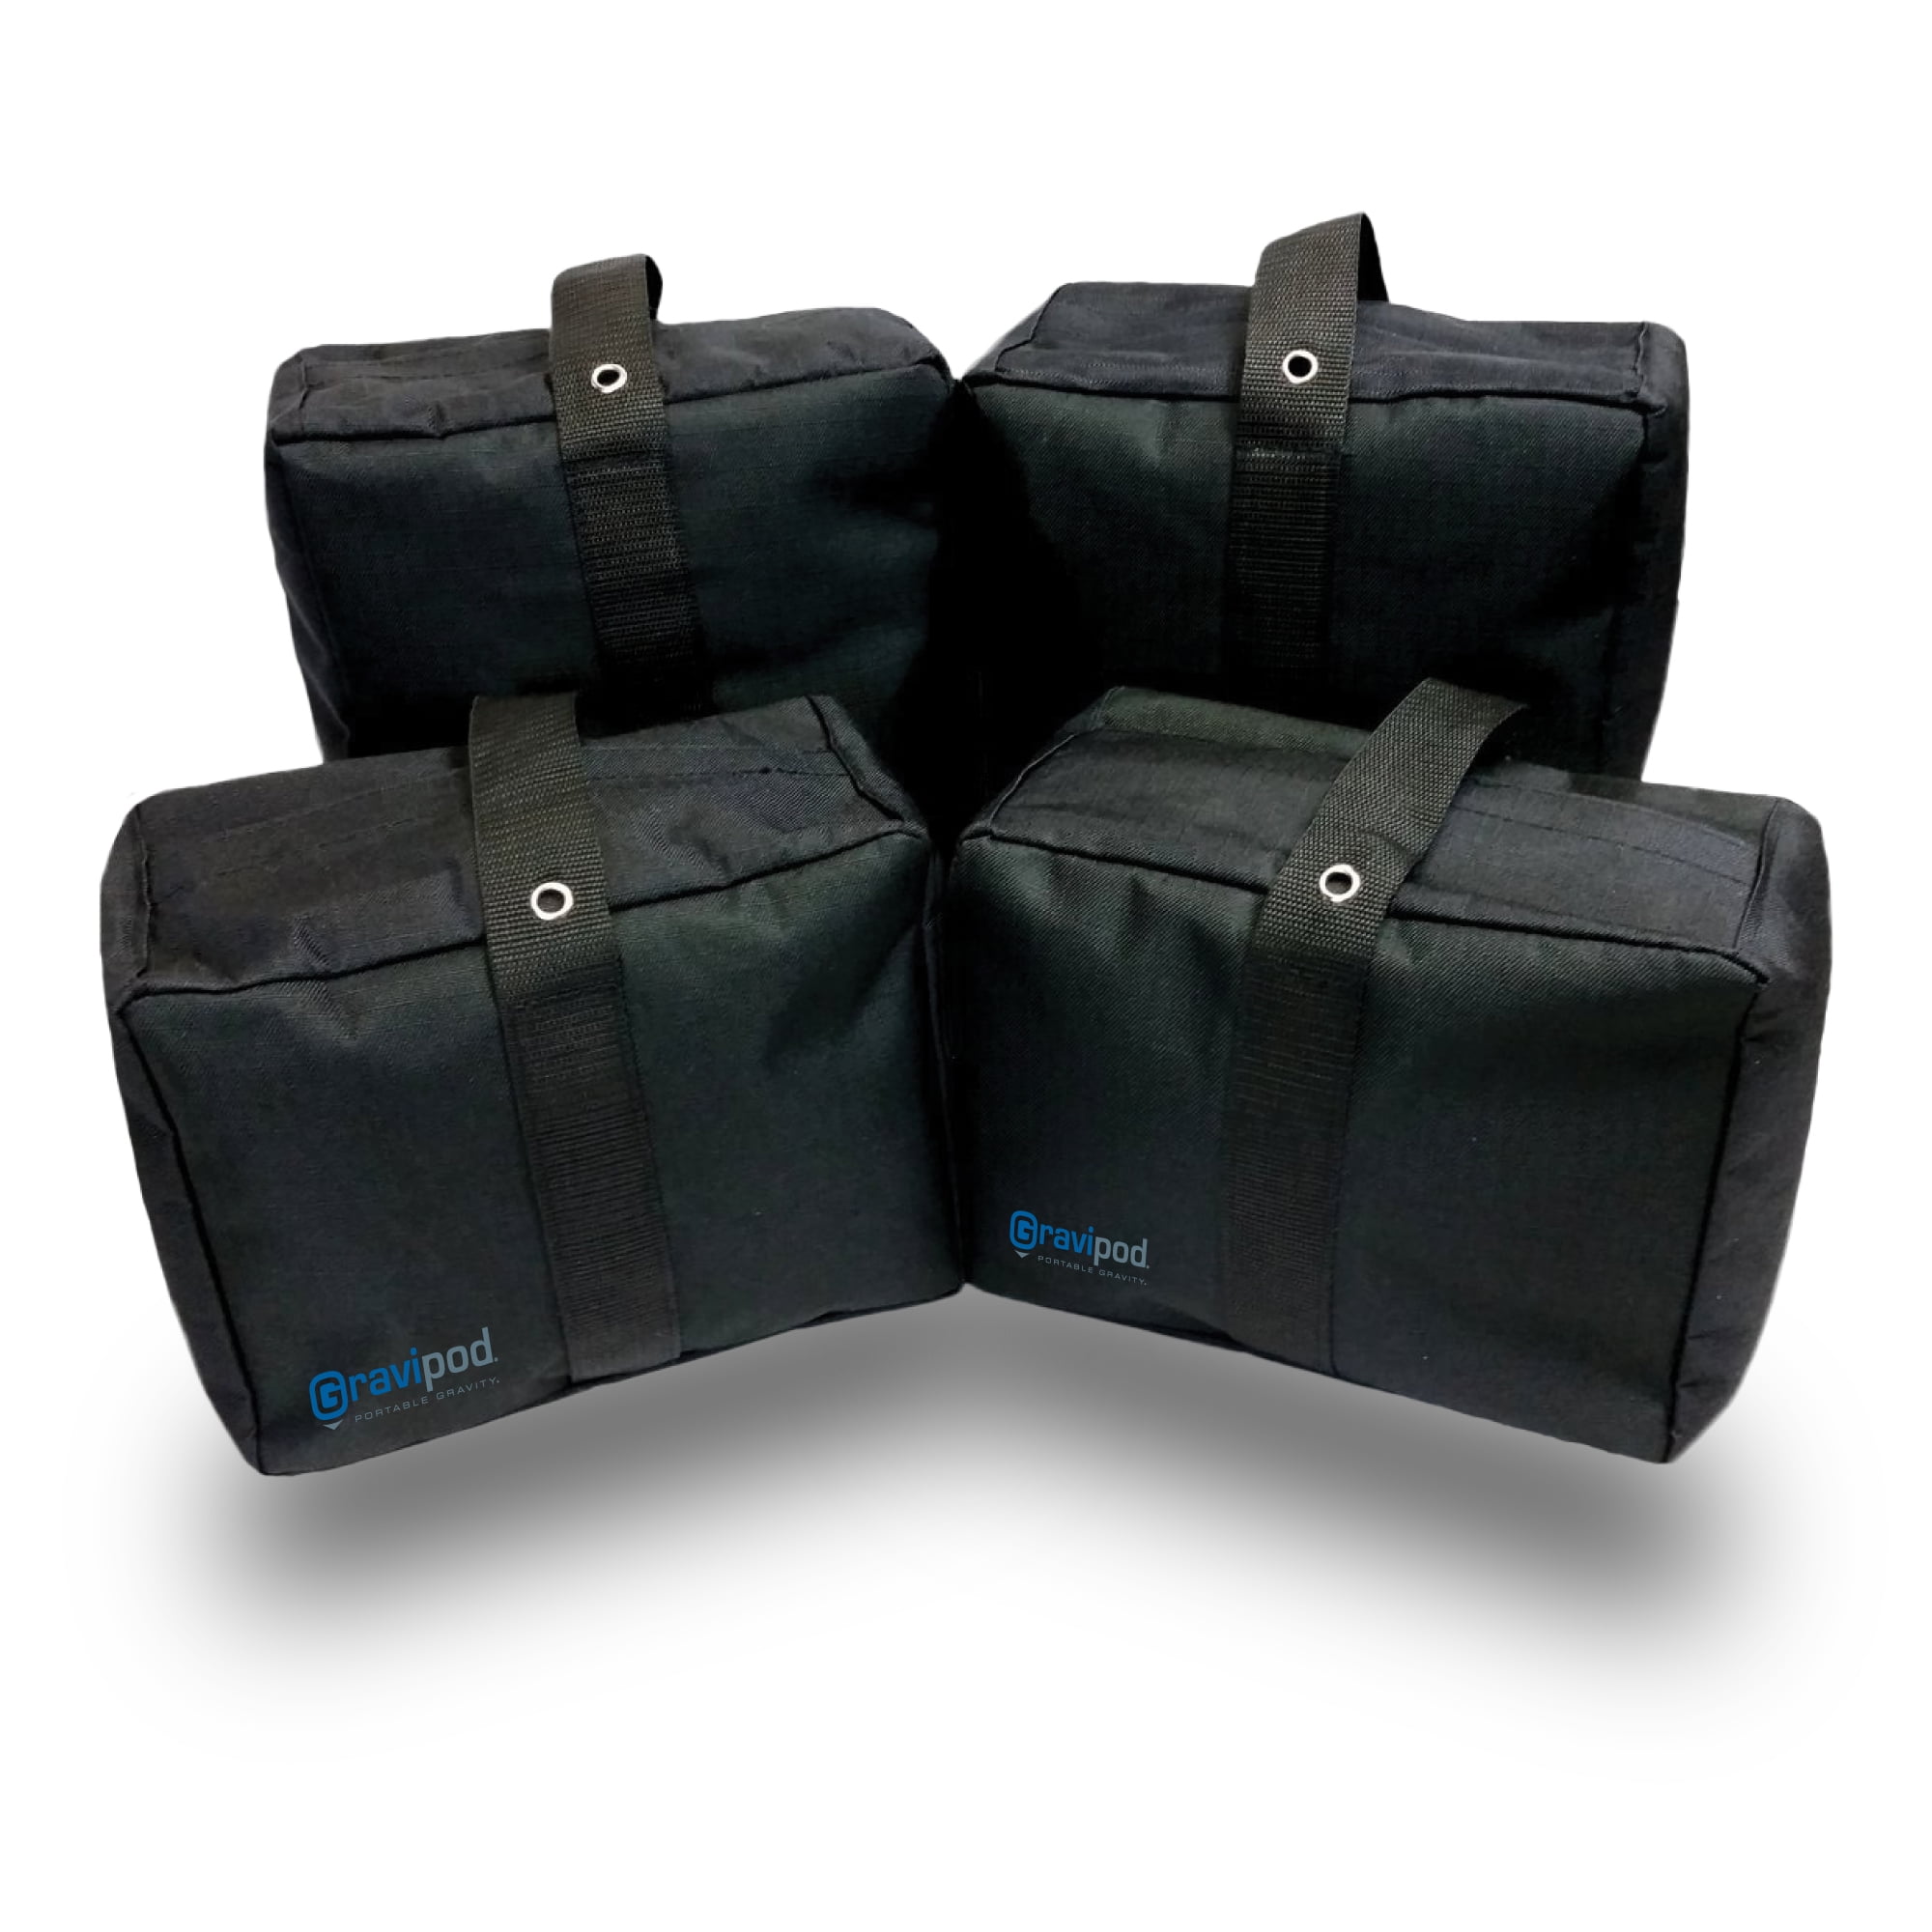 E-Z UP® Deluxe Weight Bags - 4 pack, 25 lbs.